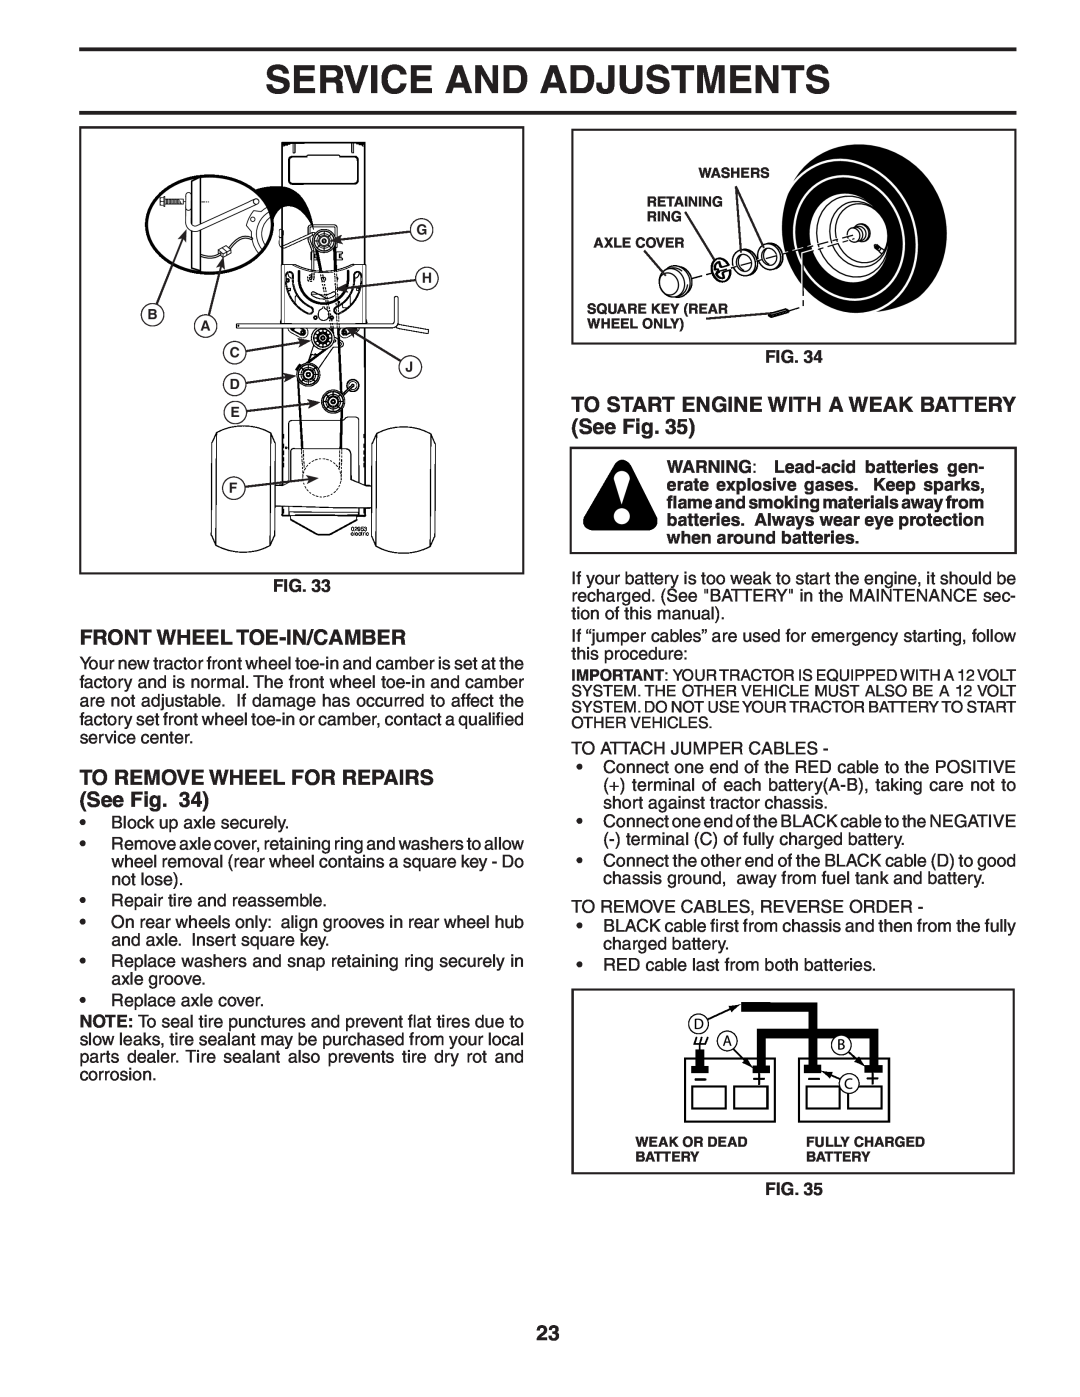 Poulan PB22H54YT manual Front Wheel Toe-In/Camber, TO REMOVE WHEEL FOR REPAIRS See Fig, Service And Adjustments, electric 